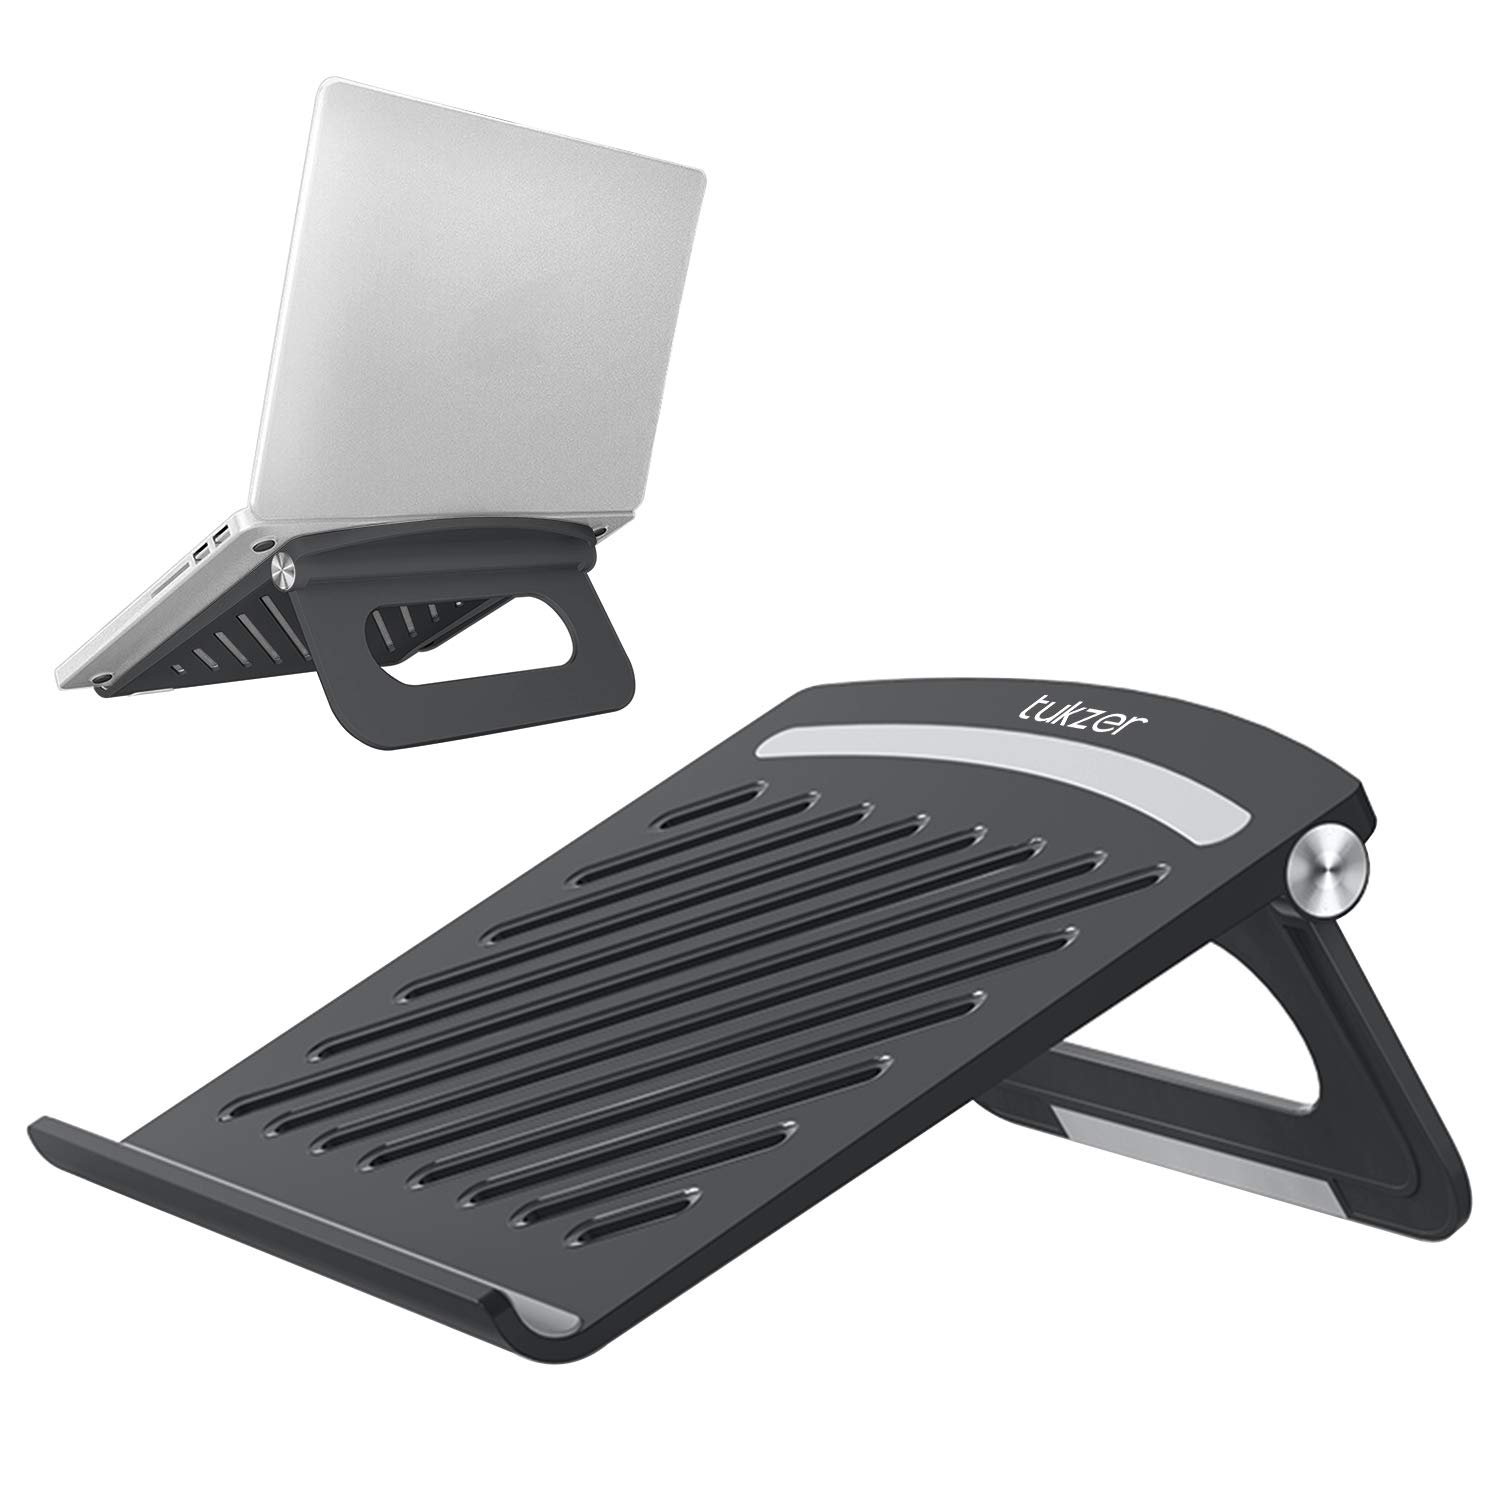 Tukzer Tabletop Laptop Stand